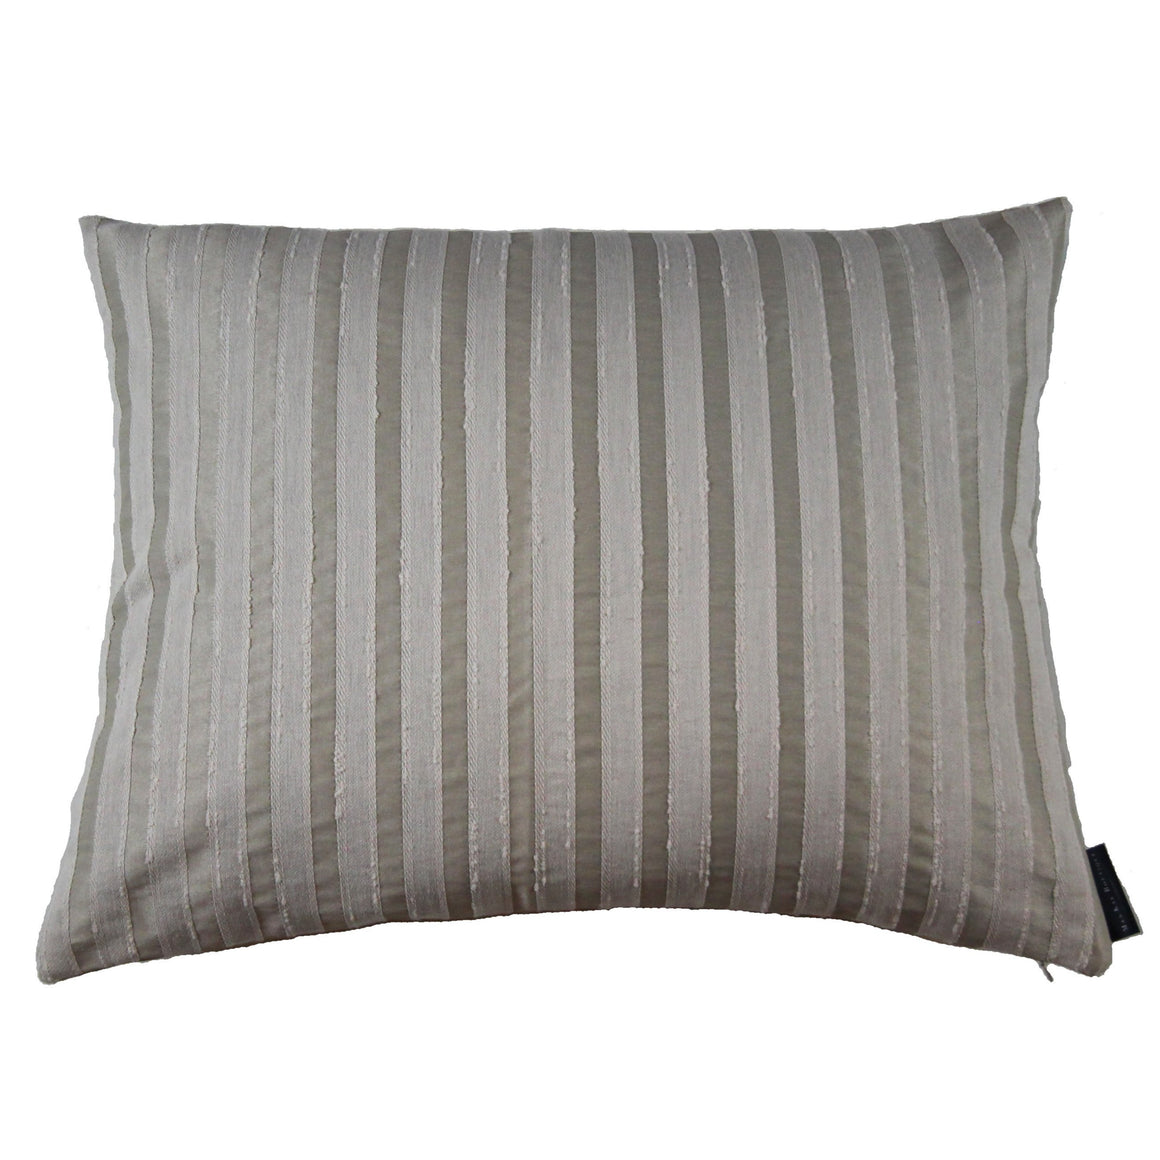 Antalya - Cream White and Beige Striped Pillow Cover - 21x17 - 22x16 - 22x17